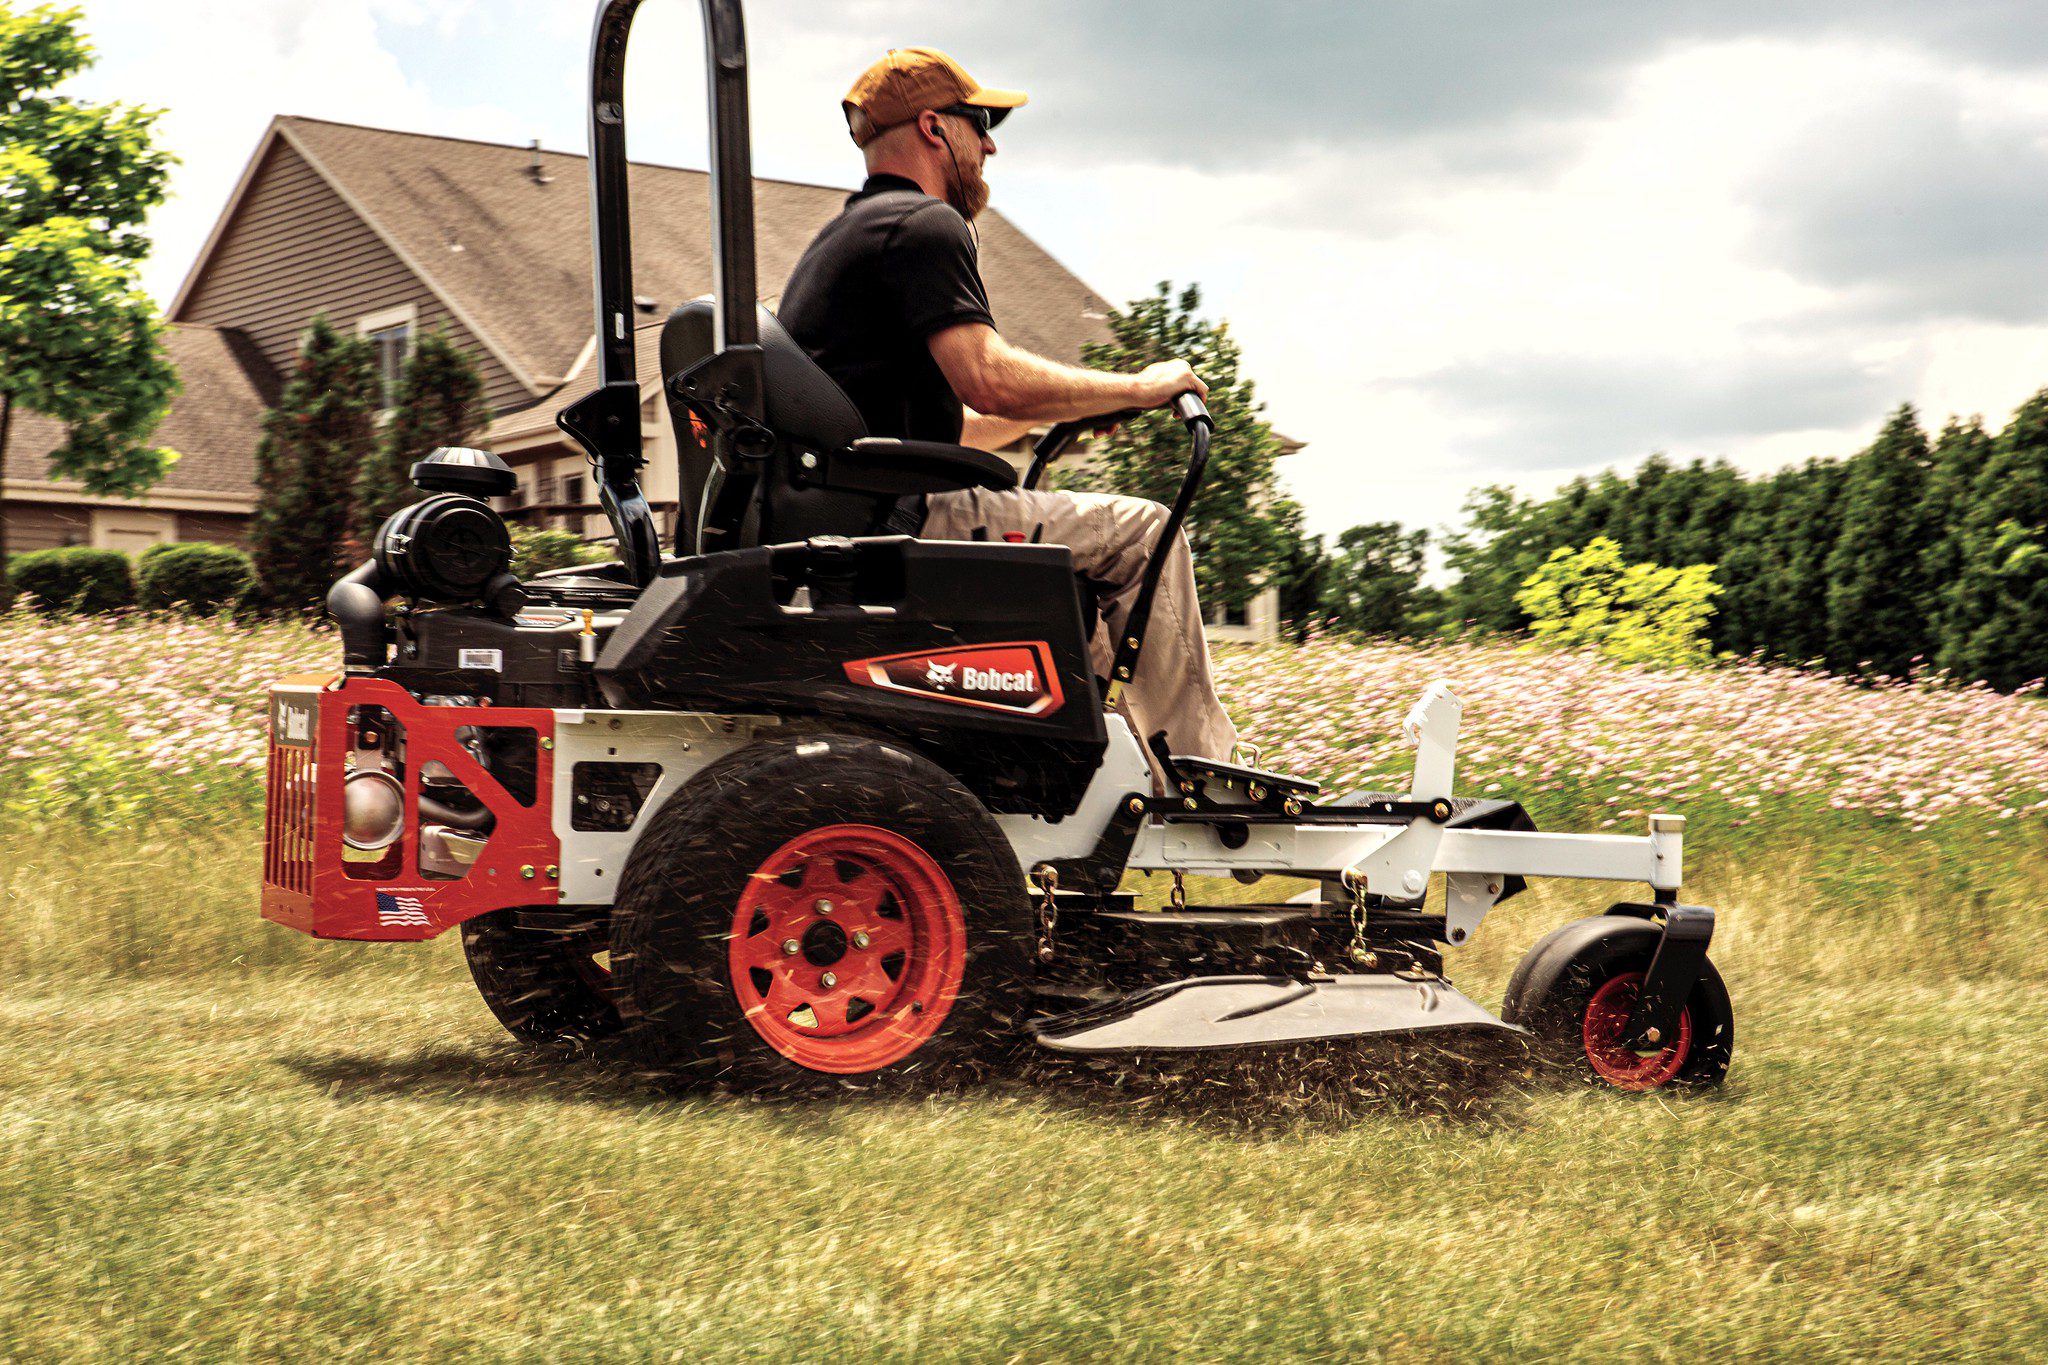 Browse Specs and more for the Bobcat ZT3500 Zero-Turn Mower 48″ - Bobcat of Indy